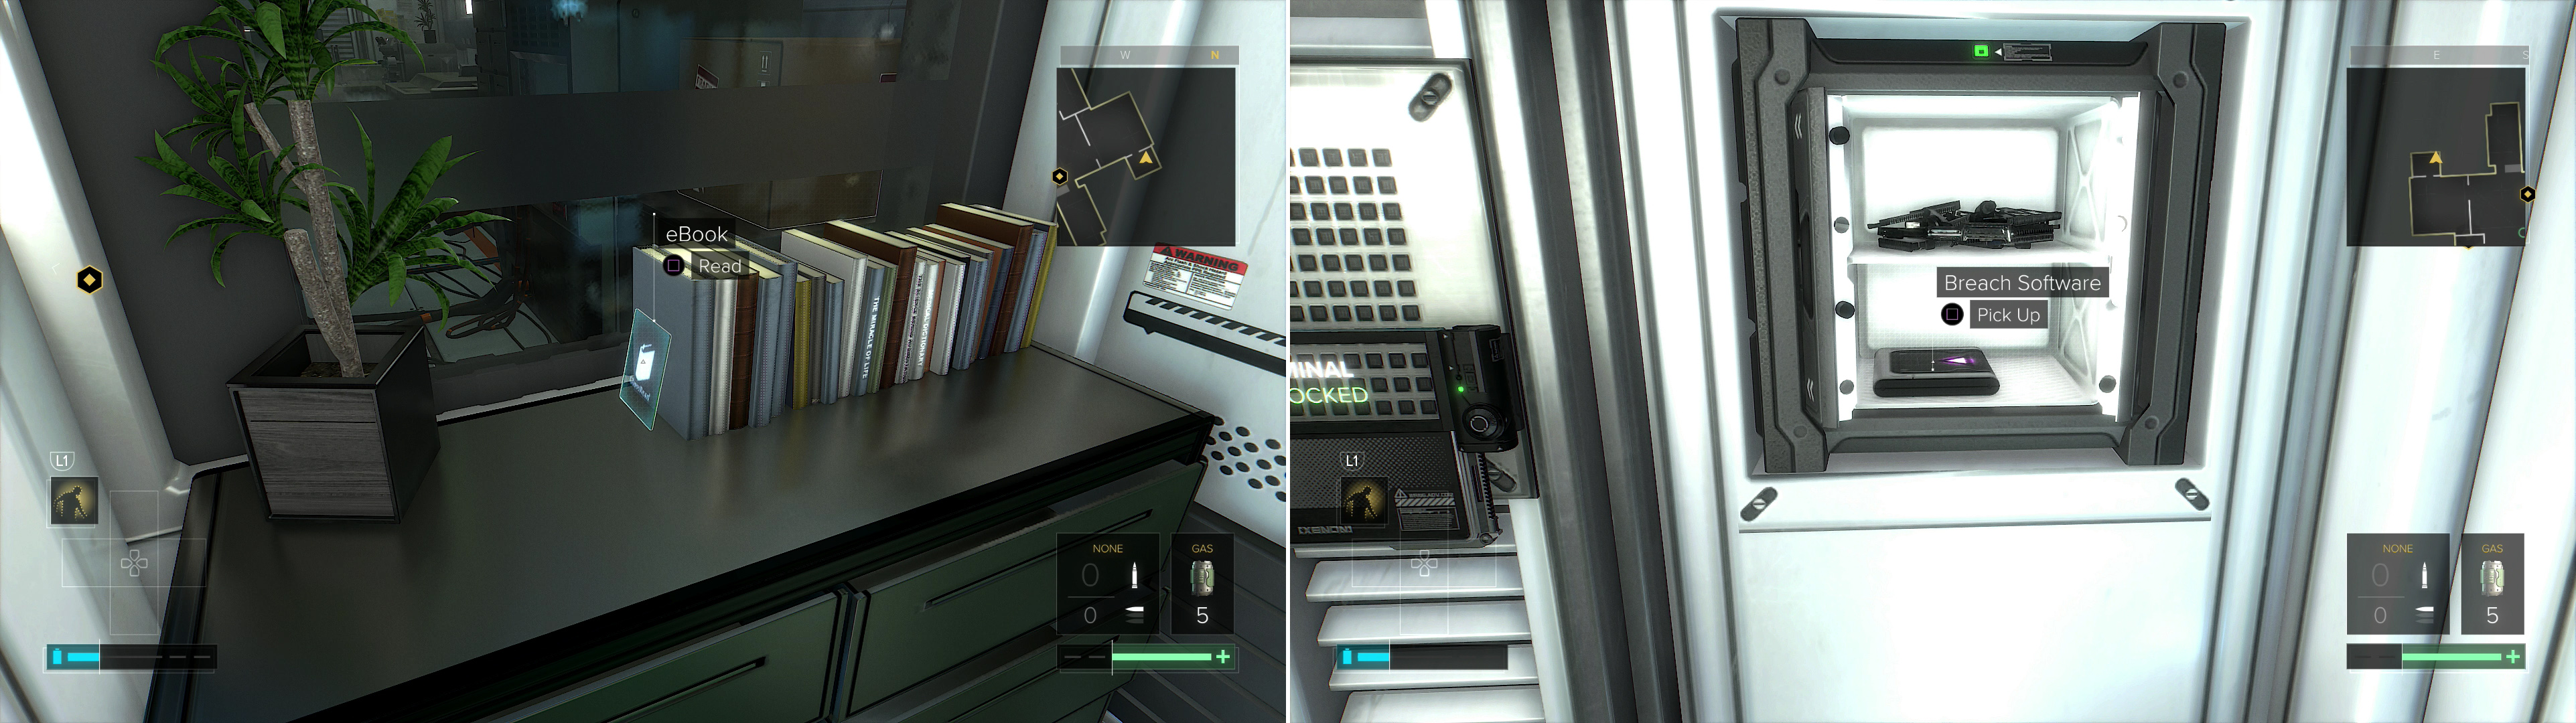 In the Forensics office you can find an eBook (left) and Breach Software #1 in a safe (right).